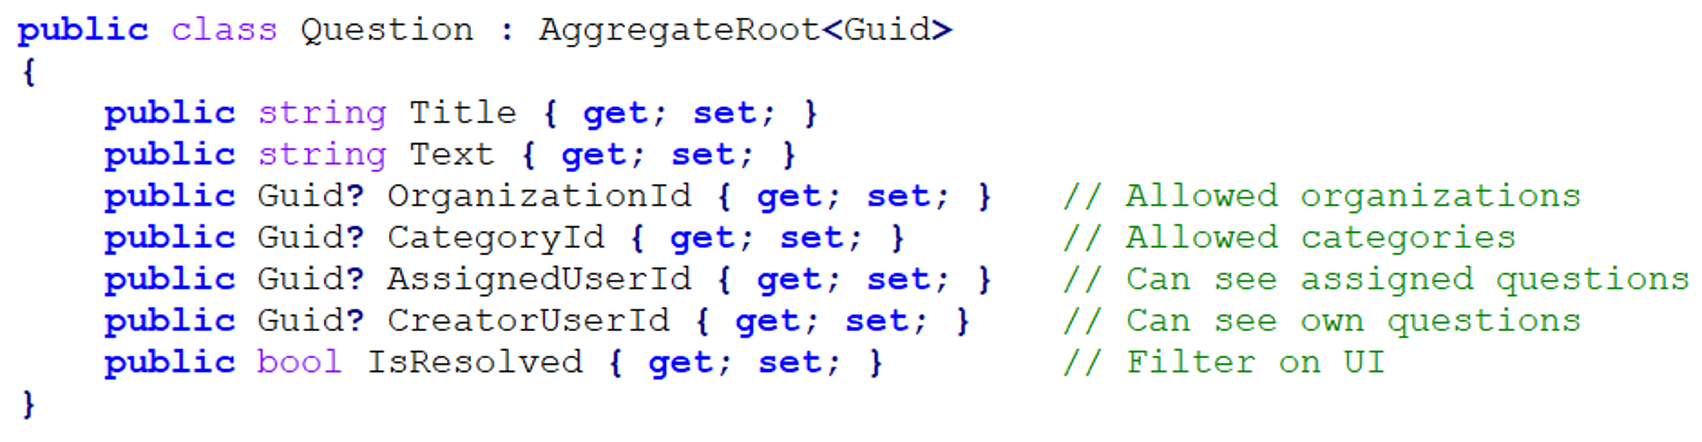 aggregateroot_question